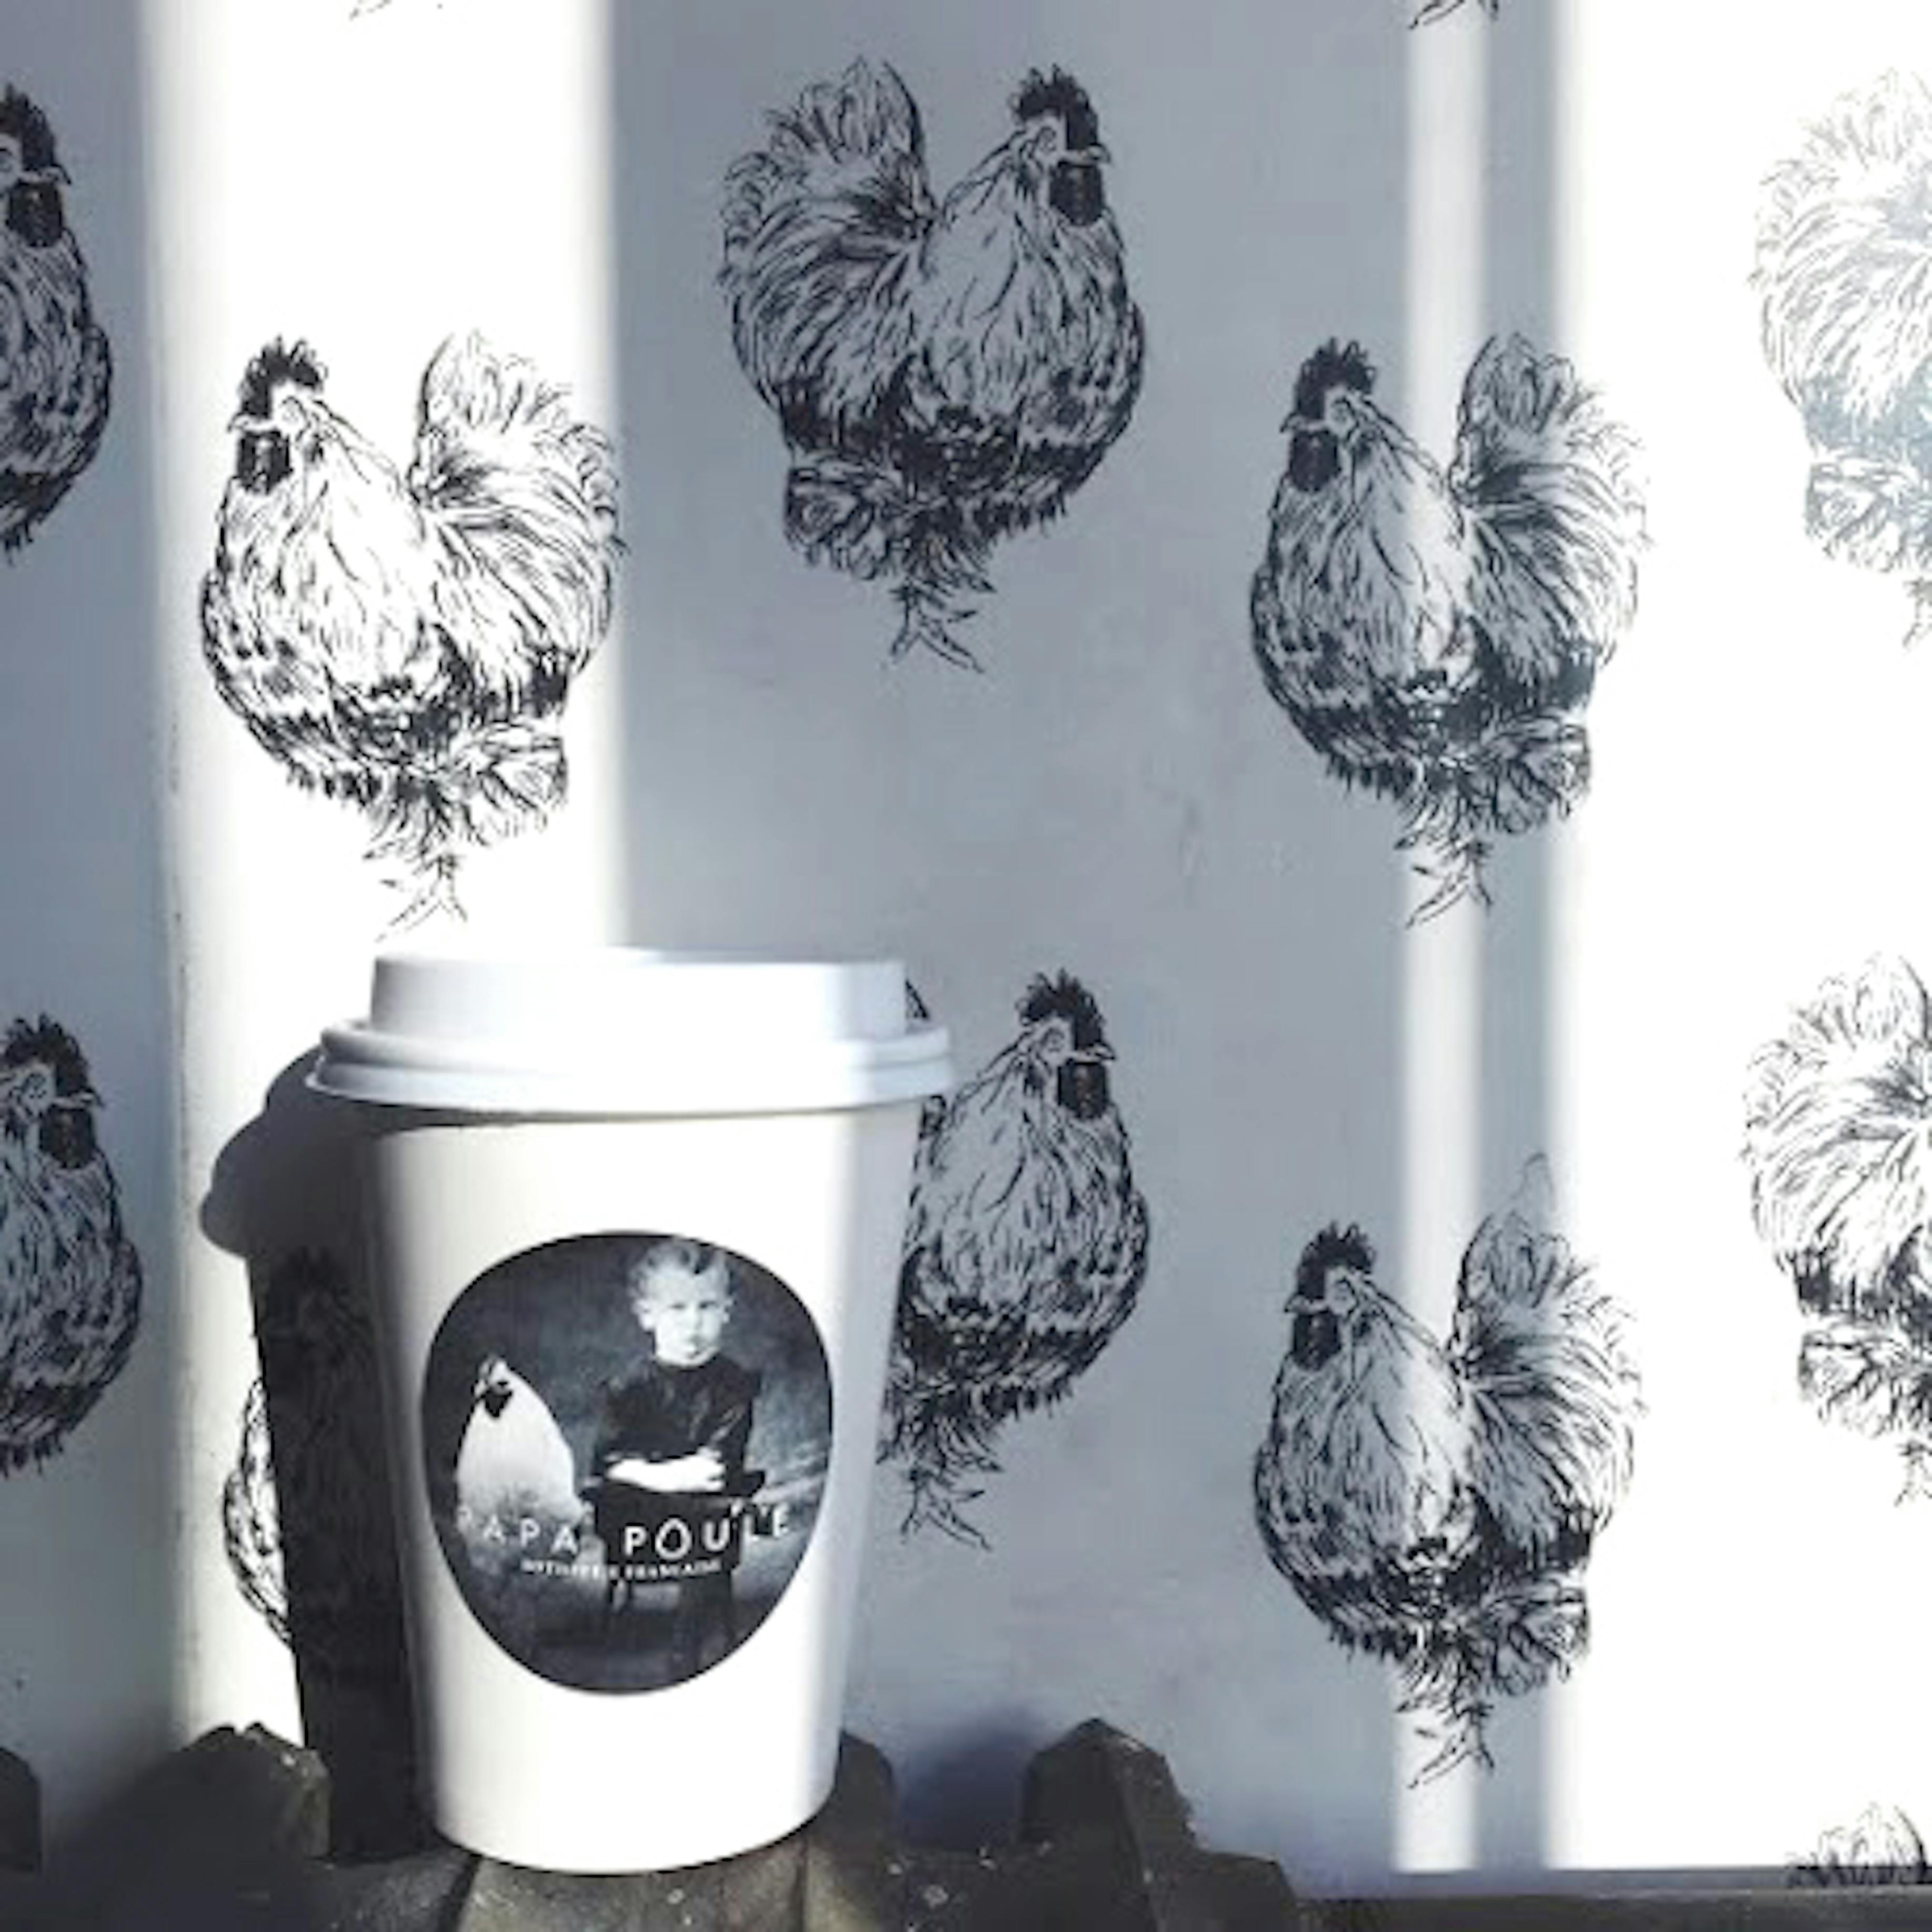 papa poule cup next to chicken wallpaper